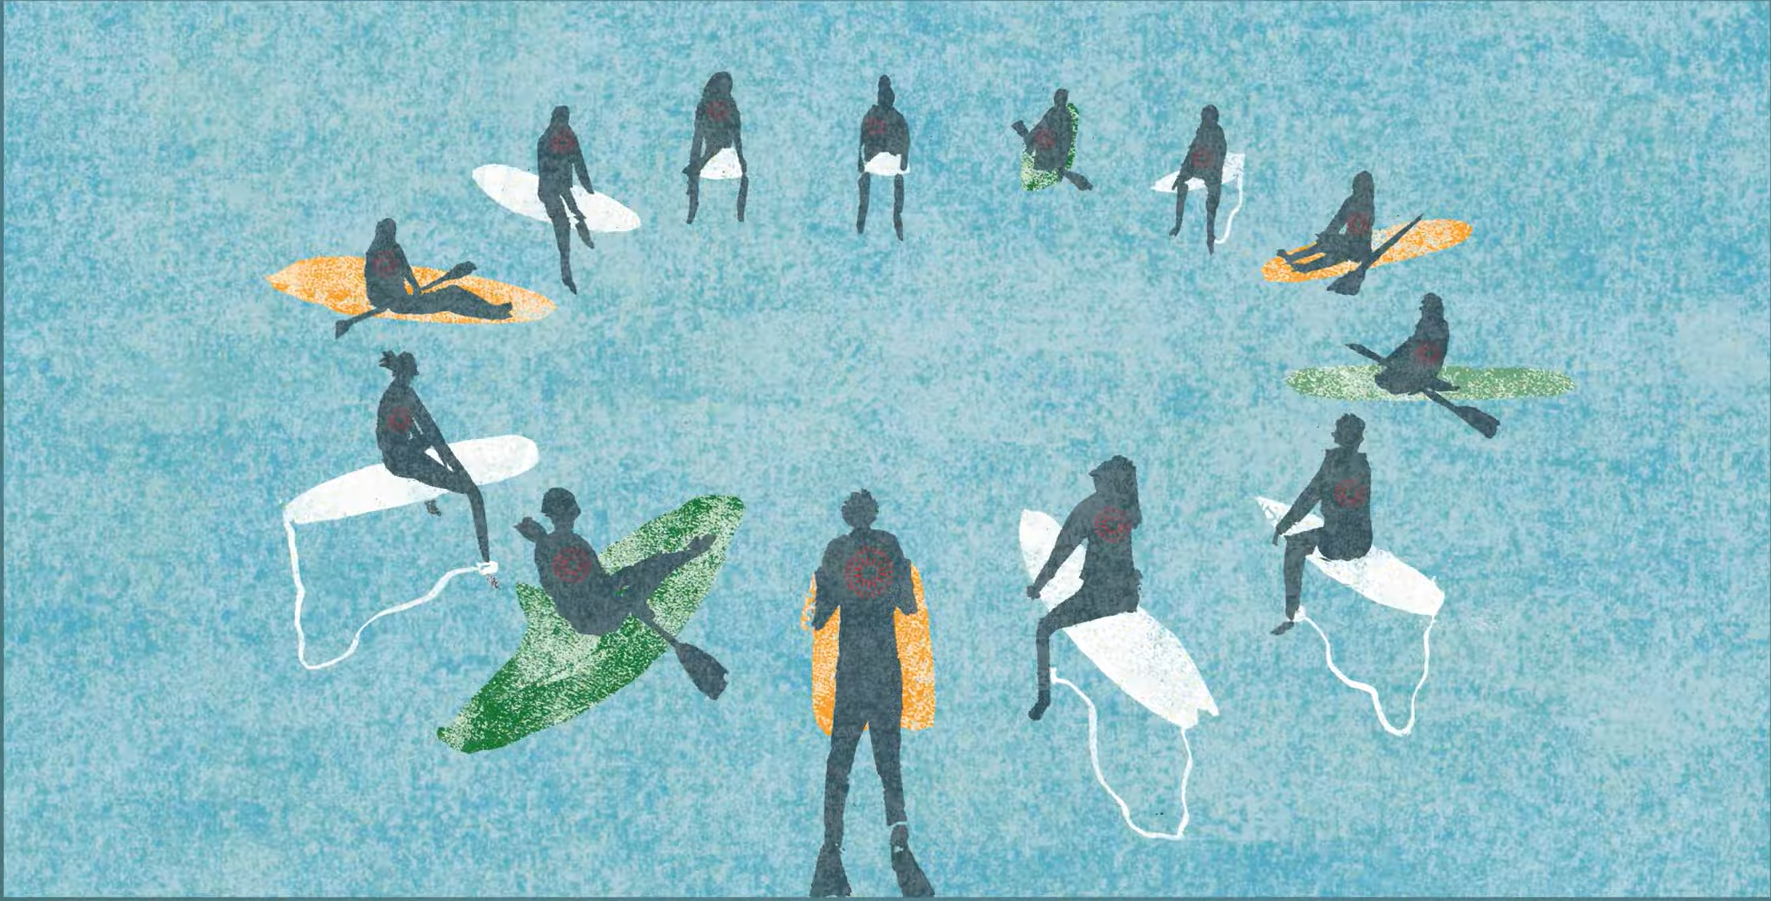 Marine citizen film screenshot of an illustration of people sitting on paddleboards in the sea in a circle